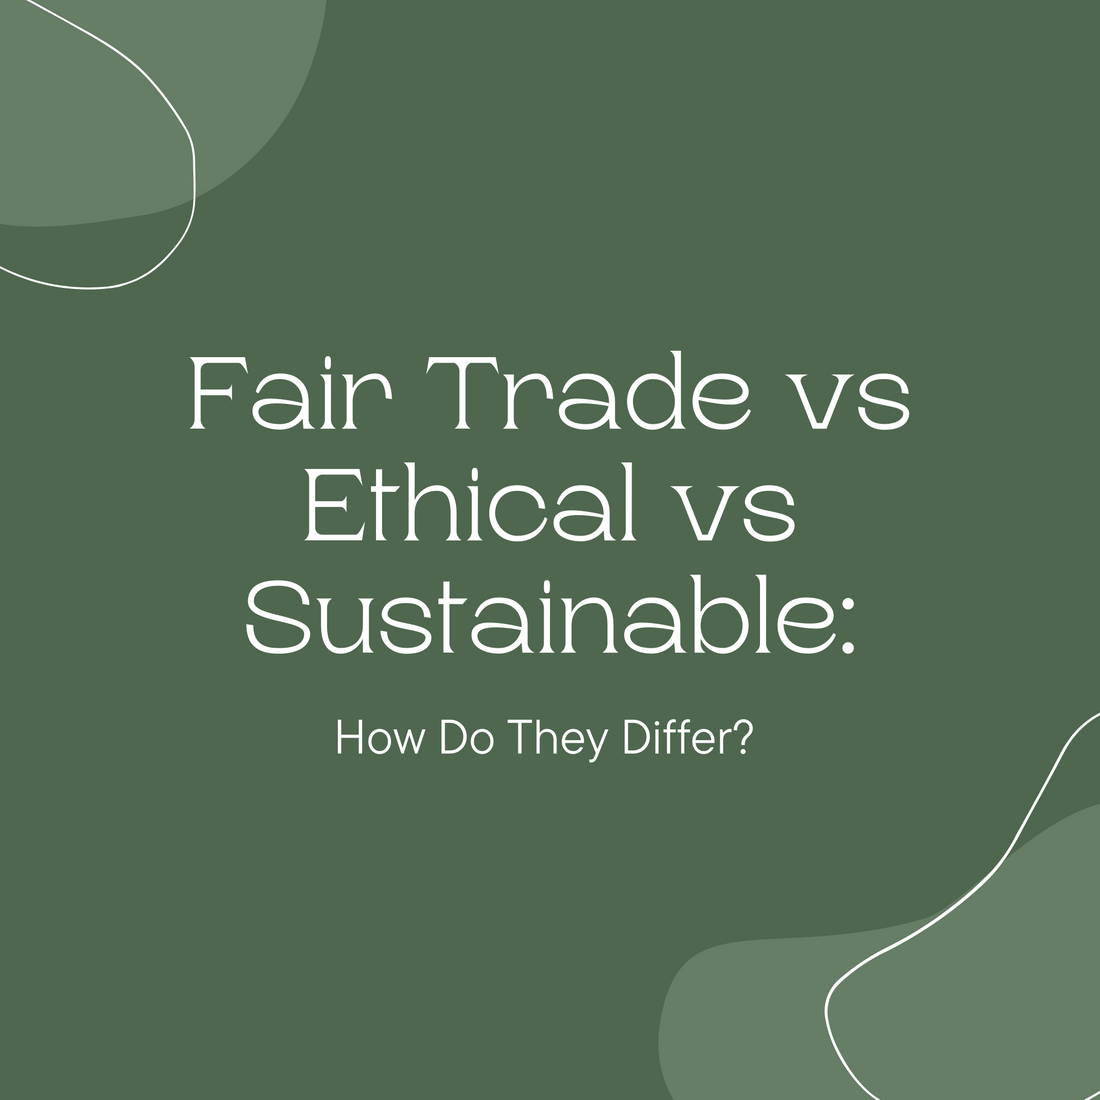 Fair Trade vs Ethical vs Sustainable: How Do They Differ?